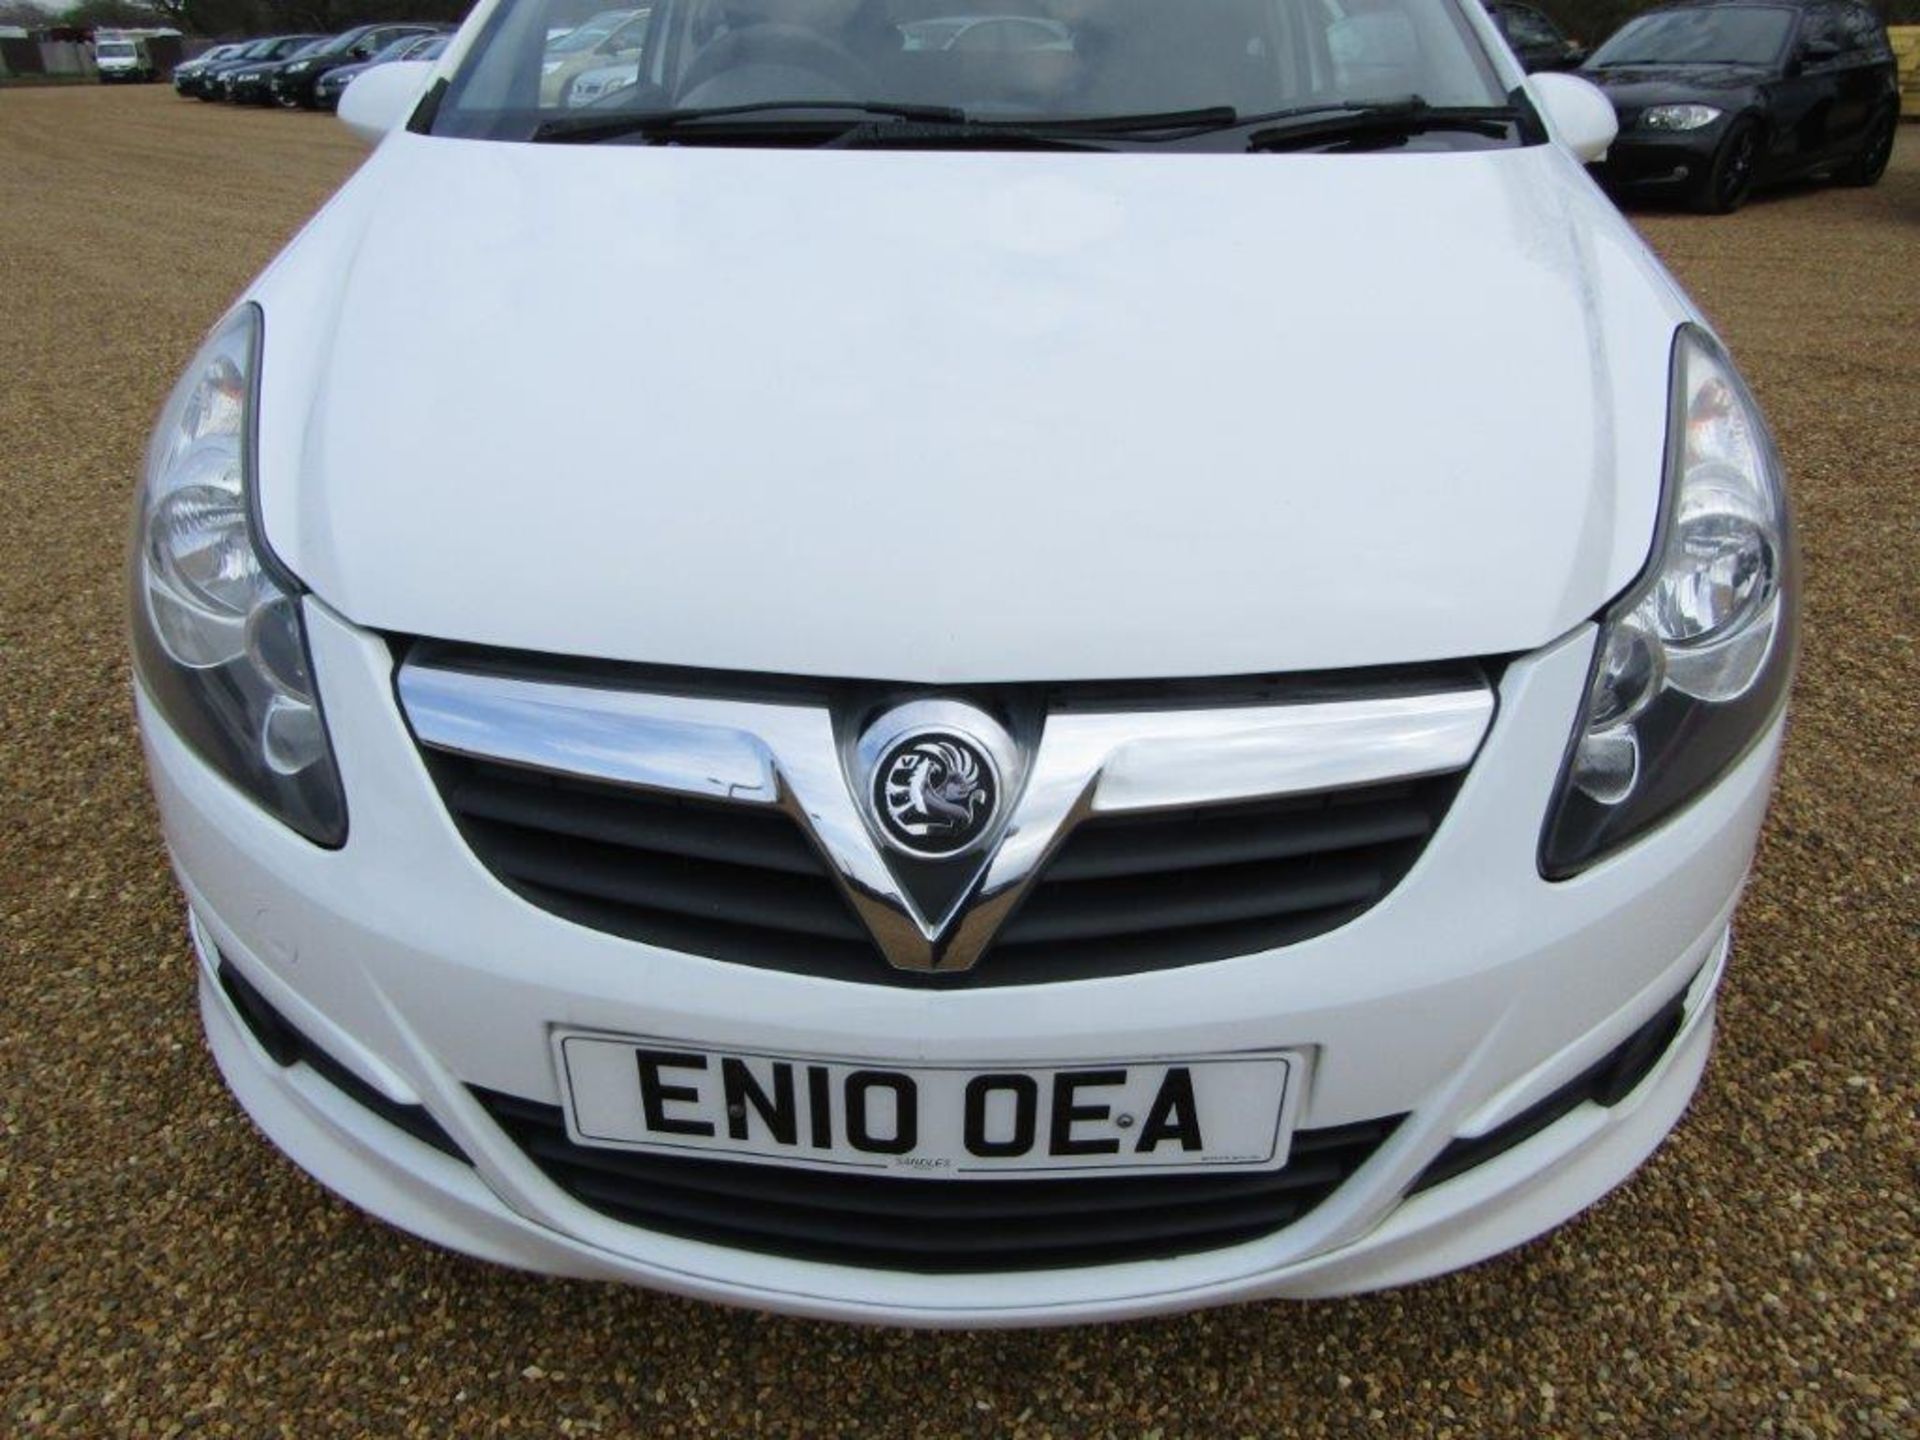 10 10 Vauxhall Corsa Limited Edition - Image 2 of 24